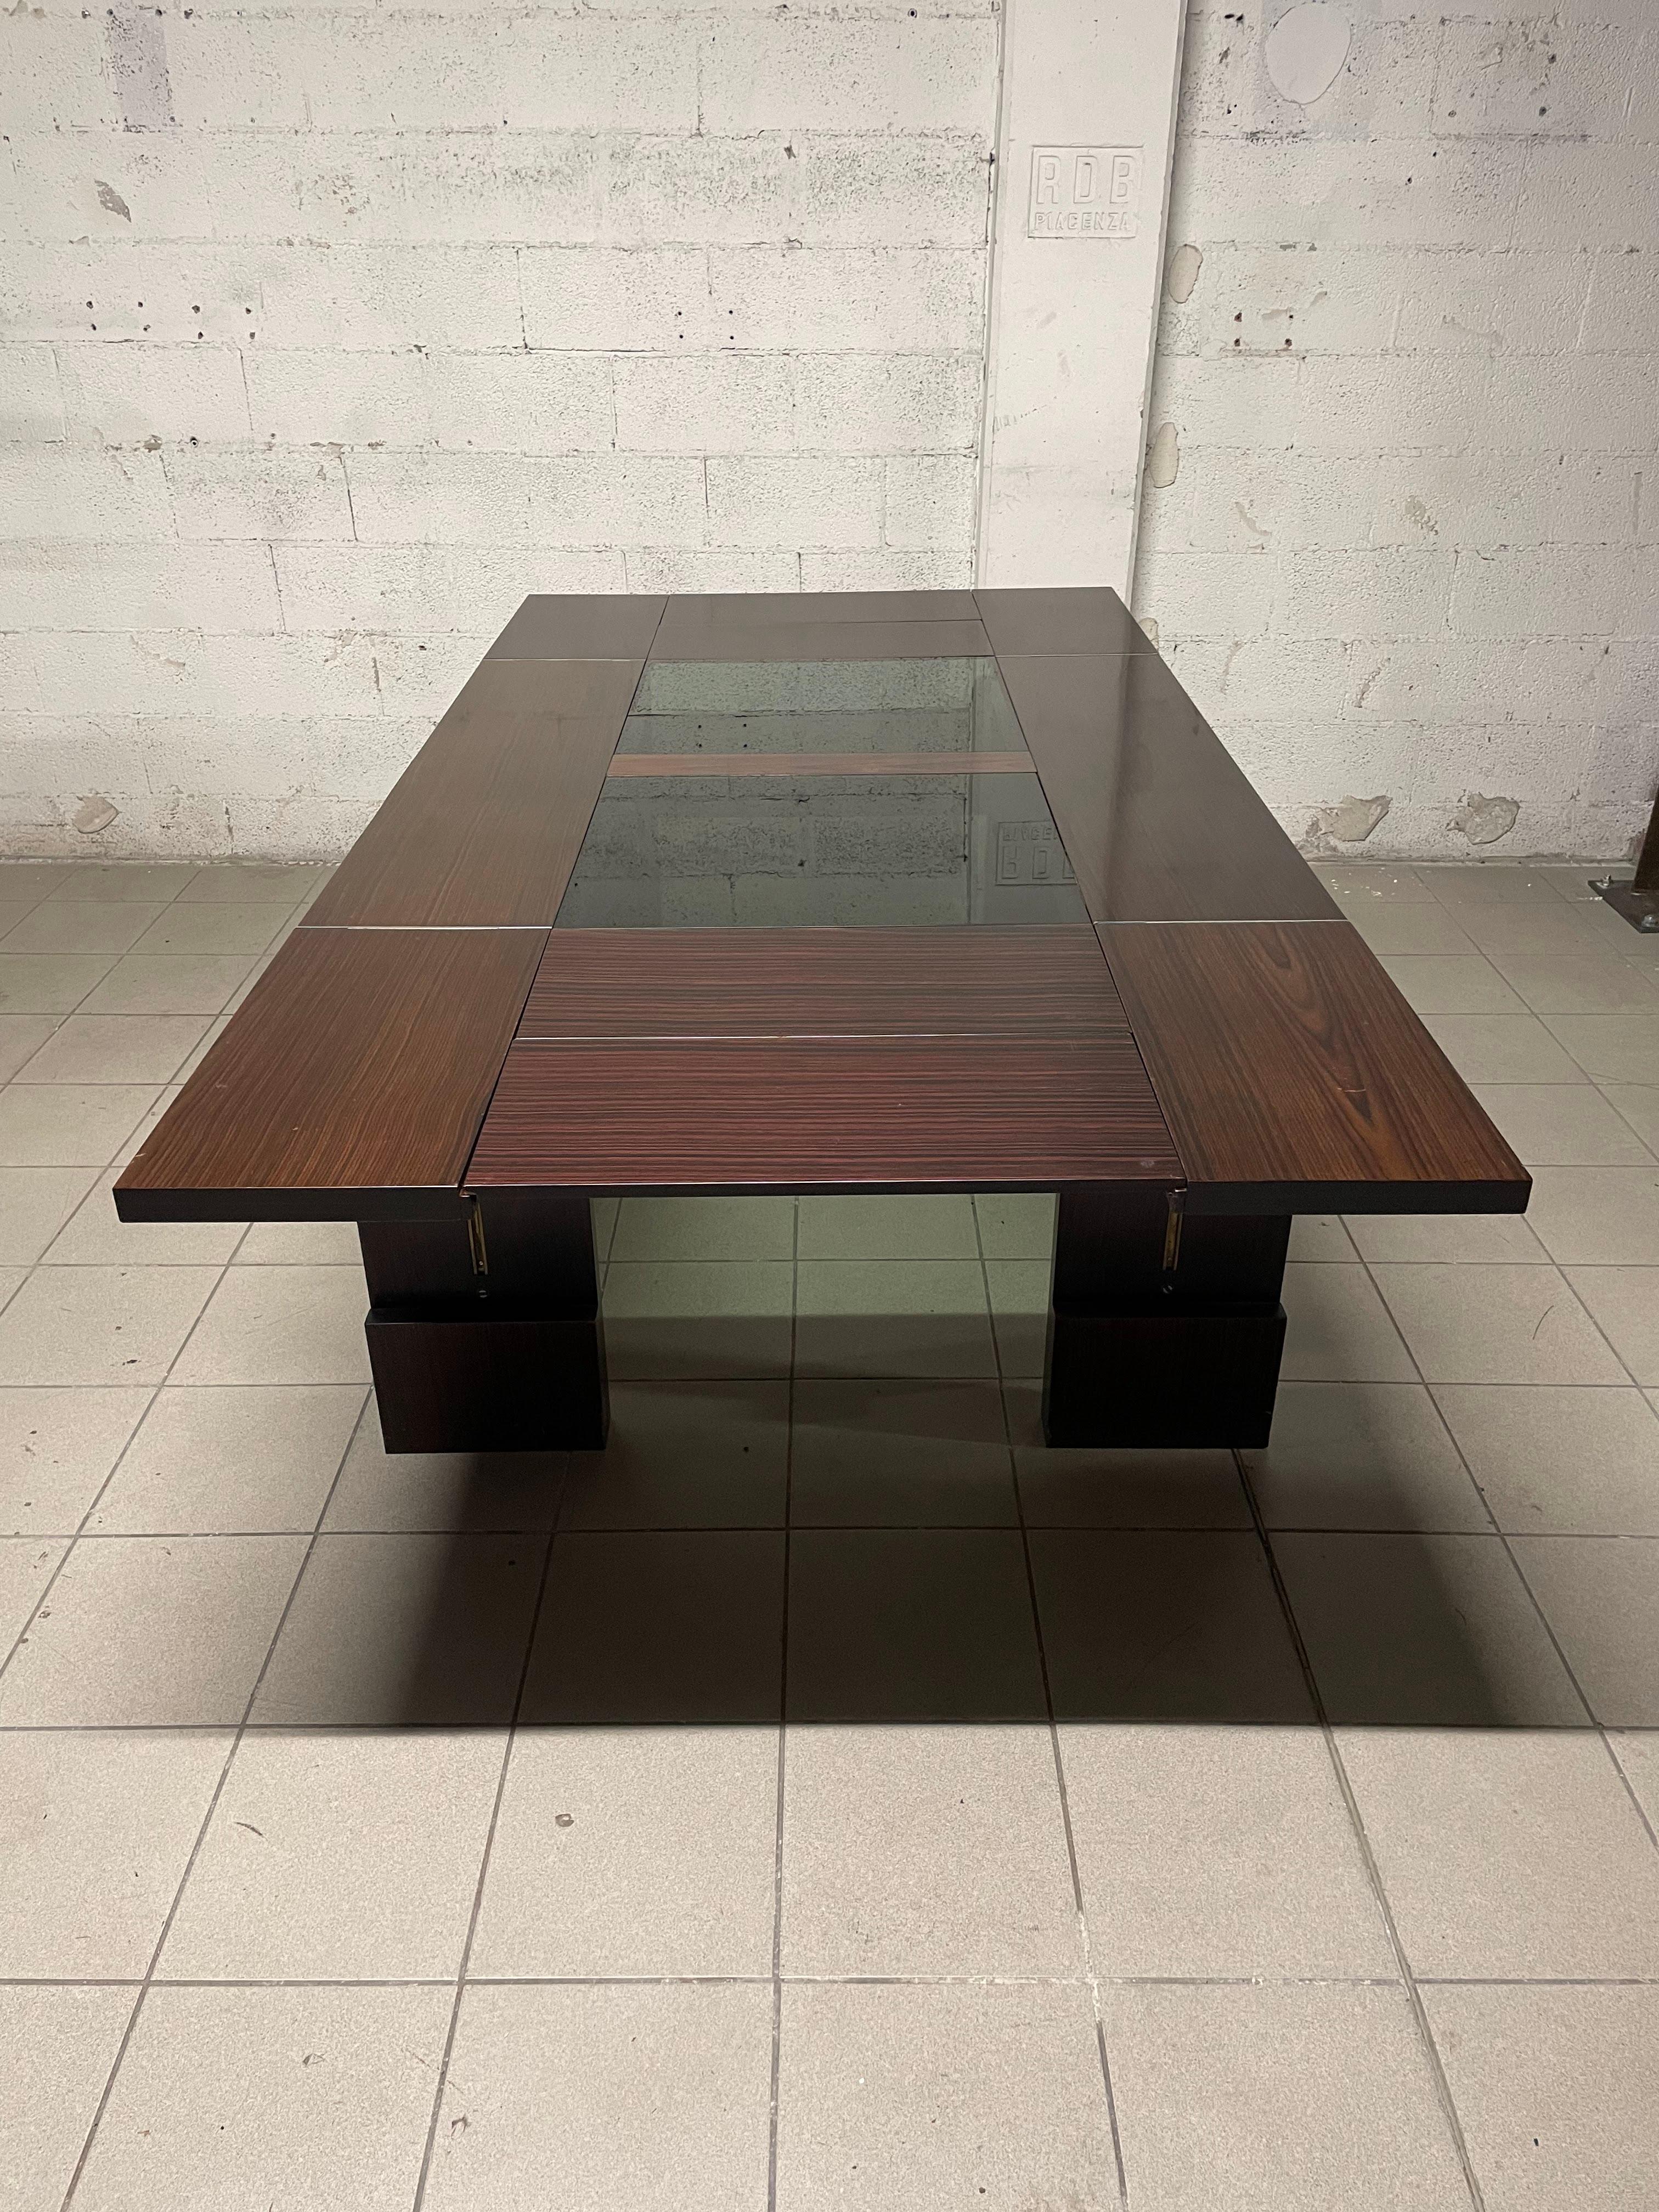 1970s extendable dining table.
Rosewood frame with central crystal inserts that make the aesthetics of this table lighter.

An easy mechanism allows two flaps to be raised, and from the sides the extensions can be pulled out.
All opened it reaches a